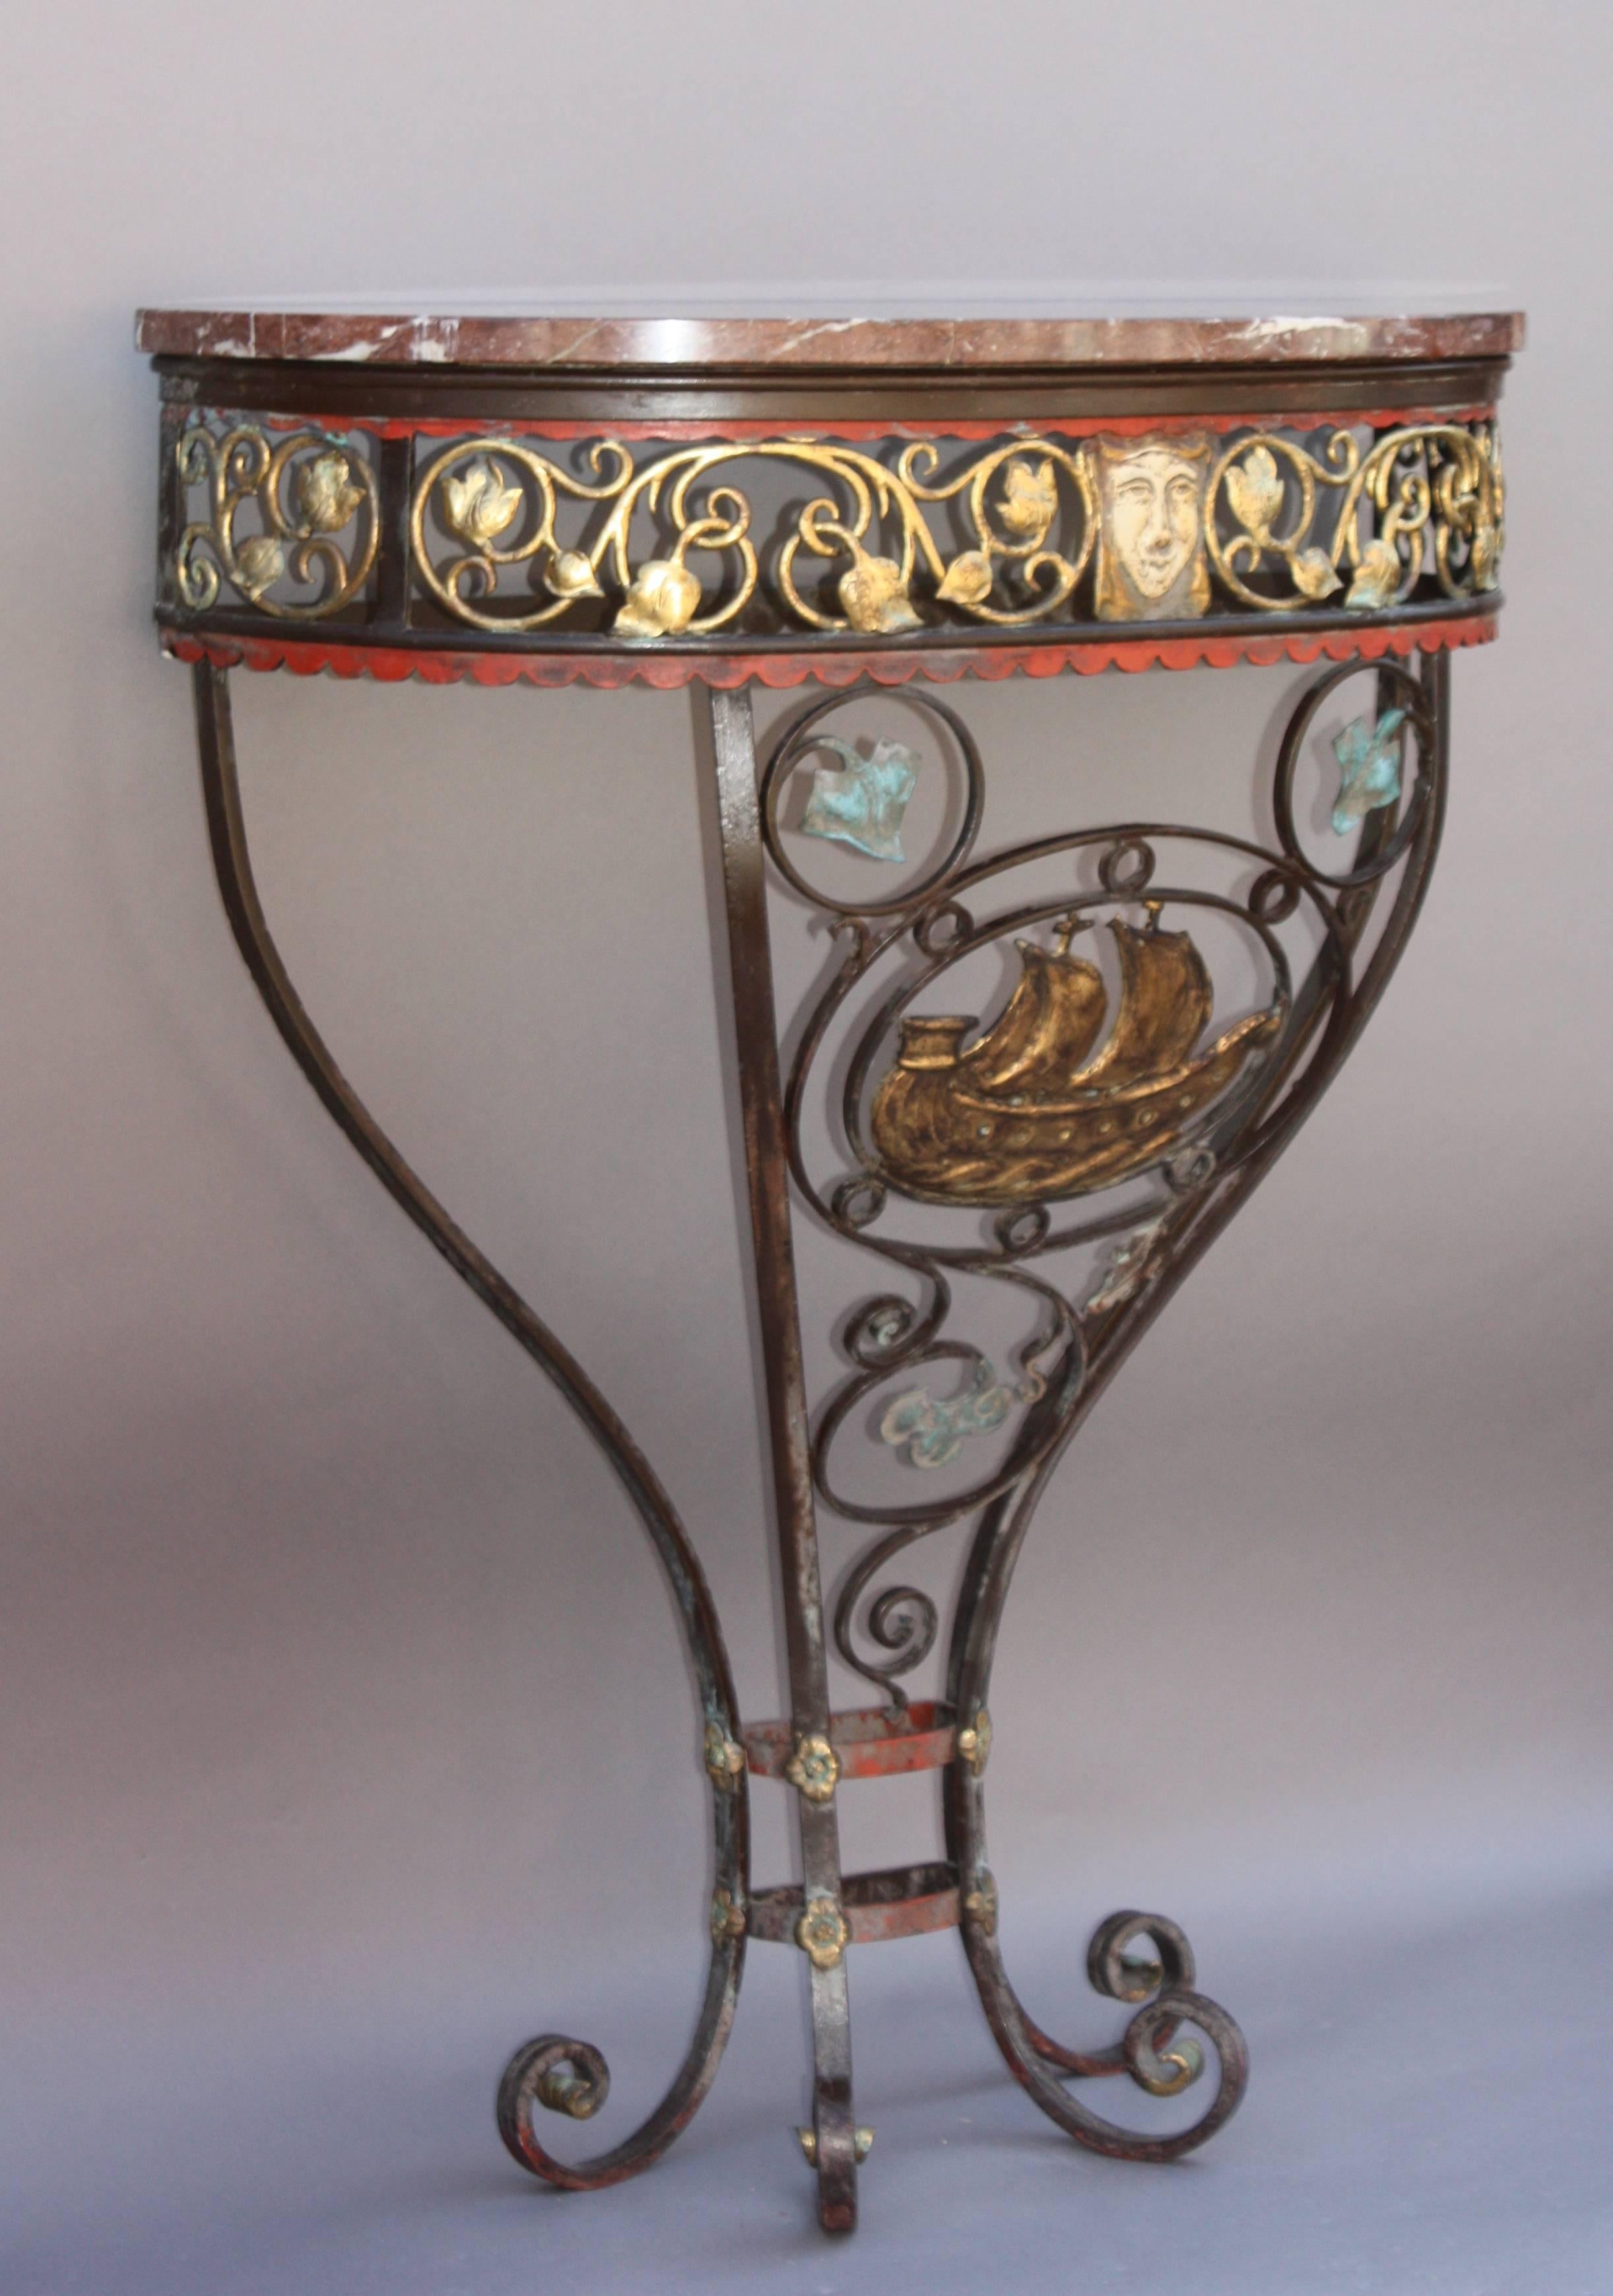 Priced and sold individually, circa 1920s console with marble ton and galleon motif. Polychrome wrought iron and bronze construction with marble top.